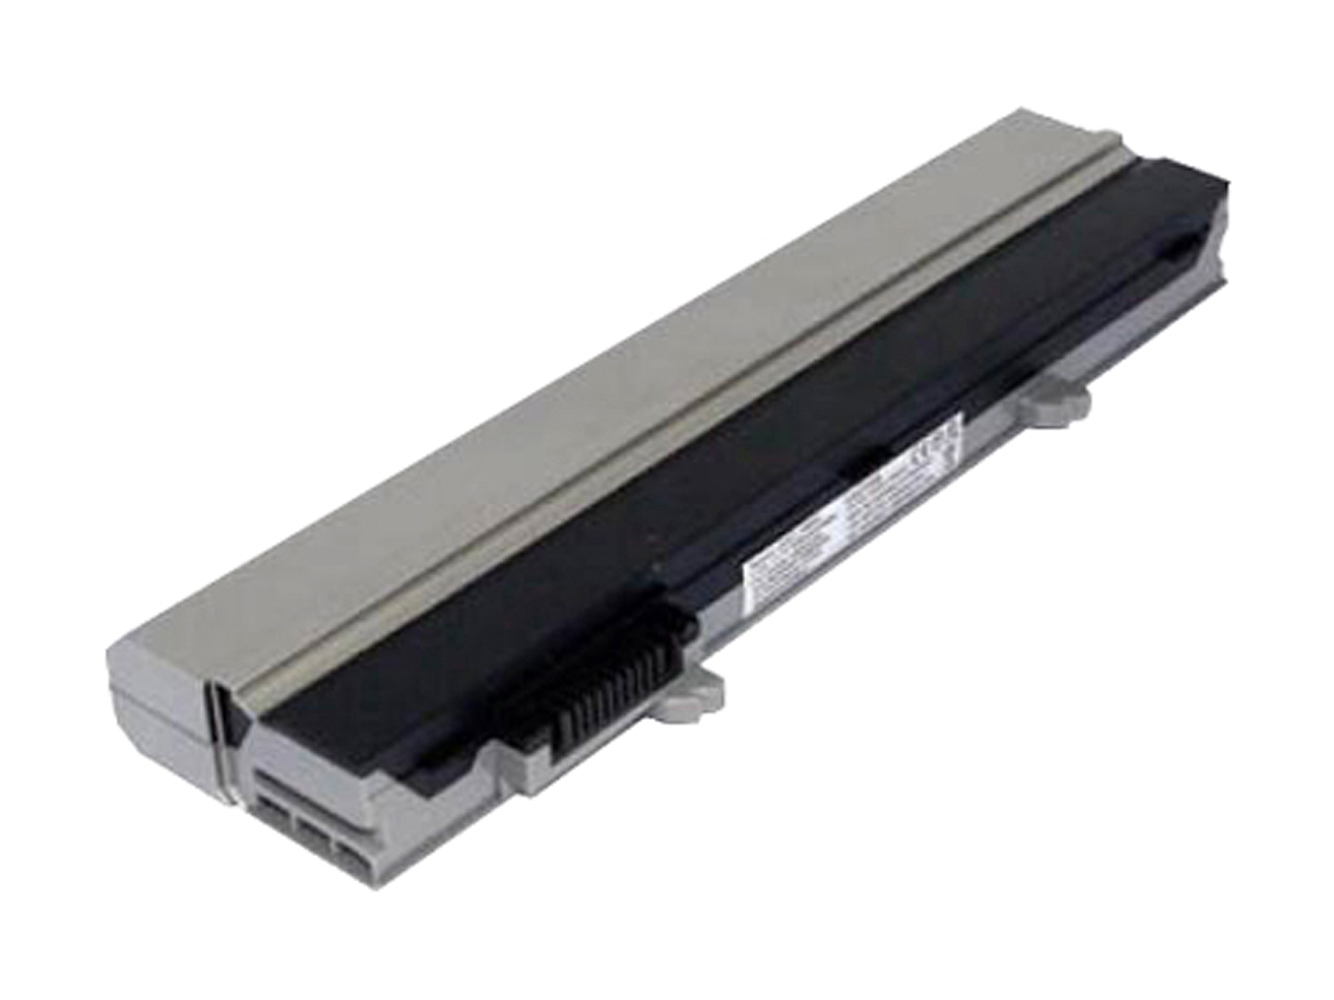 0FX8X, 312-0822 replacement Laptop Battery for Dell Latitude E4300, 5200mAh, 11.10V